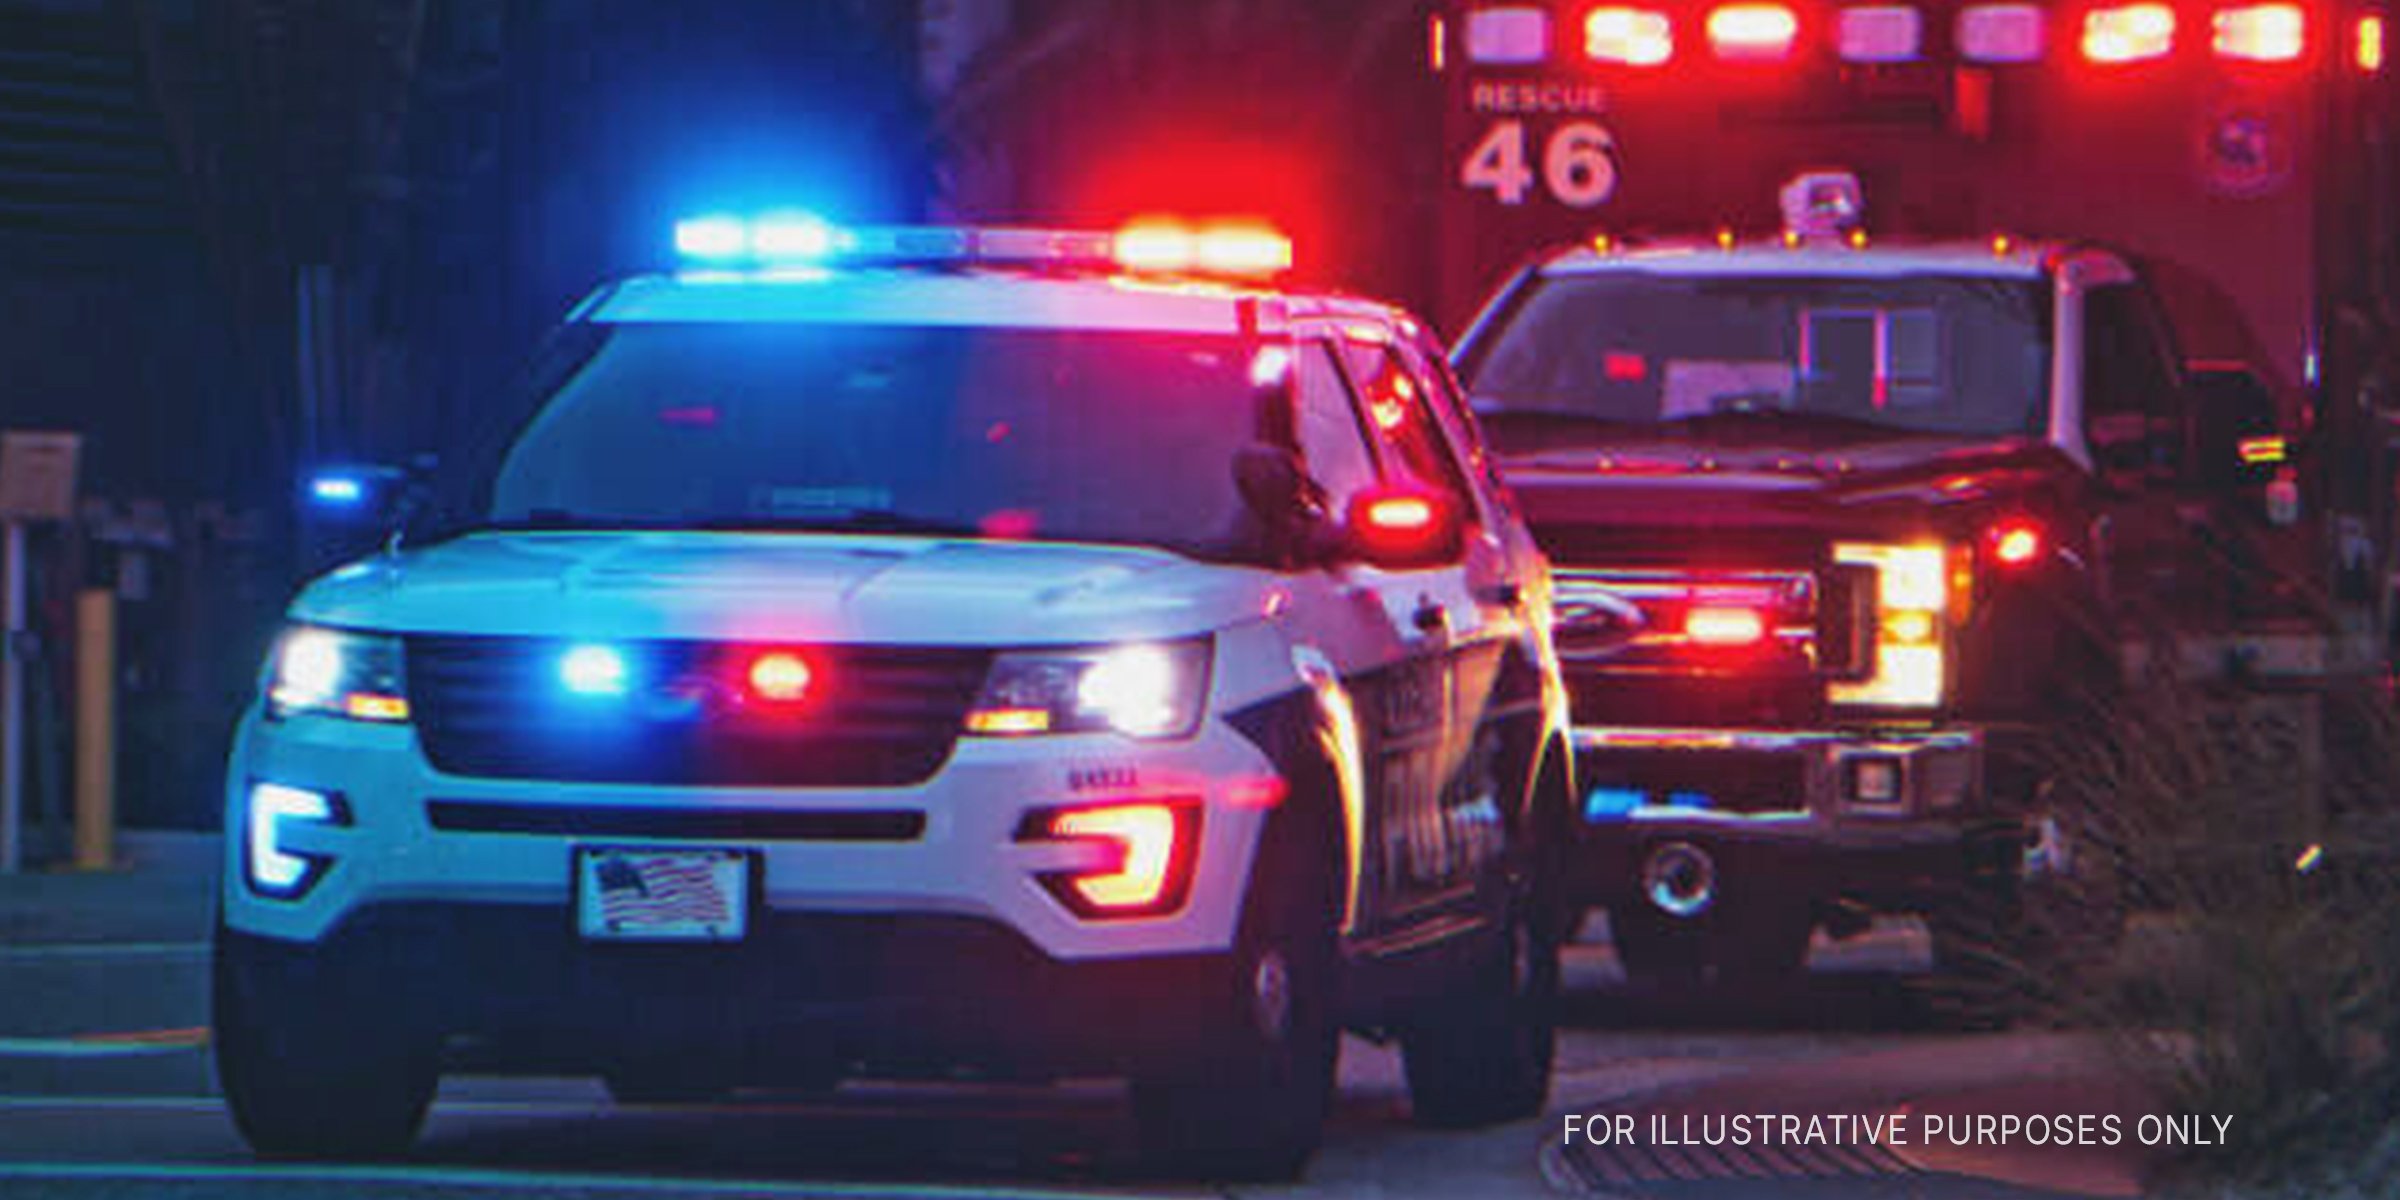 Two Police Cars | Source: Shutterstock